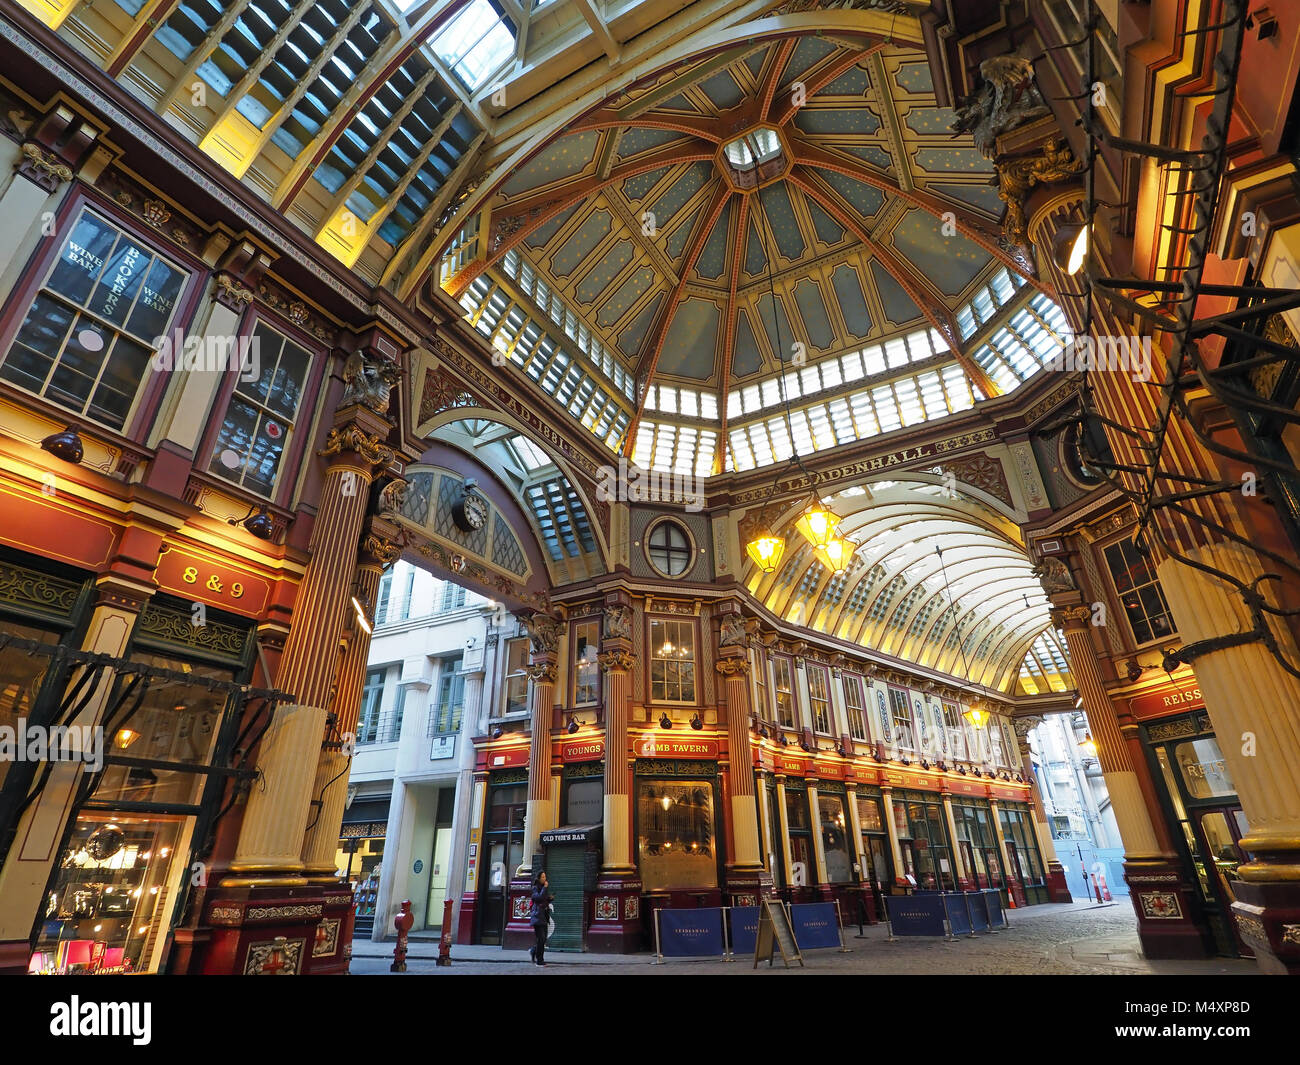 A wide angle view of the interior of Leadenhall Market in London Stock Photo